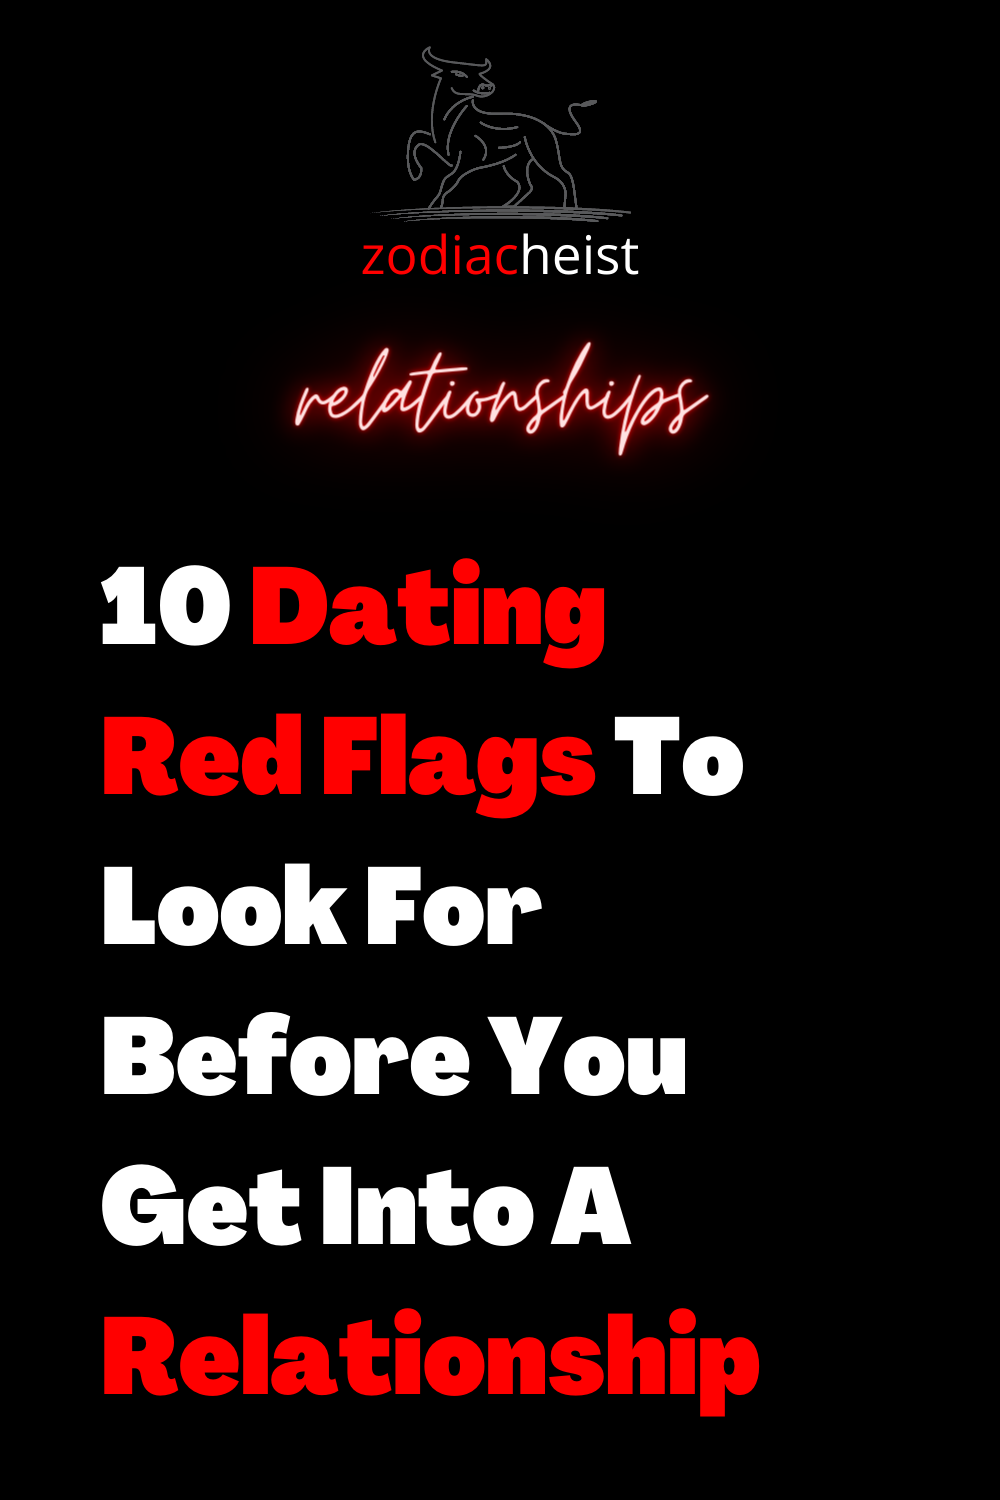 10 Dating Red Flags To Look For Before You Get Into A Relationship